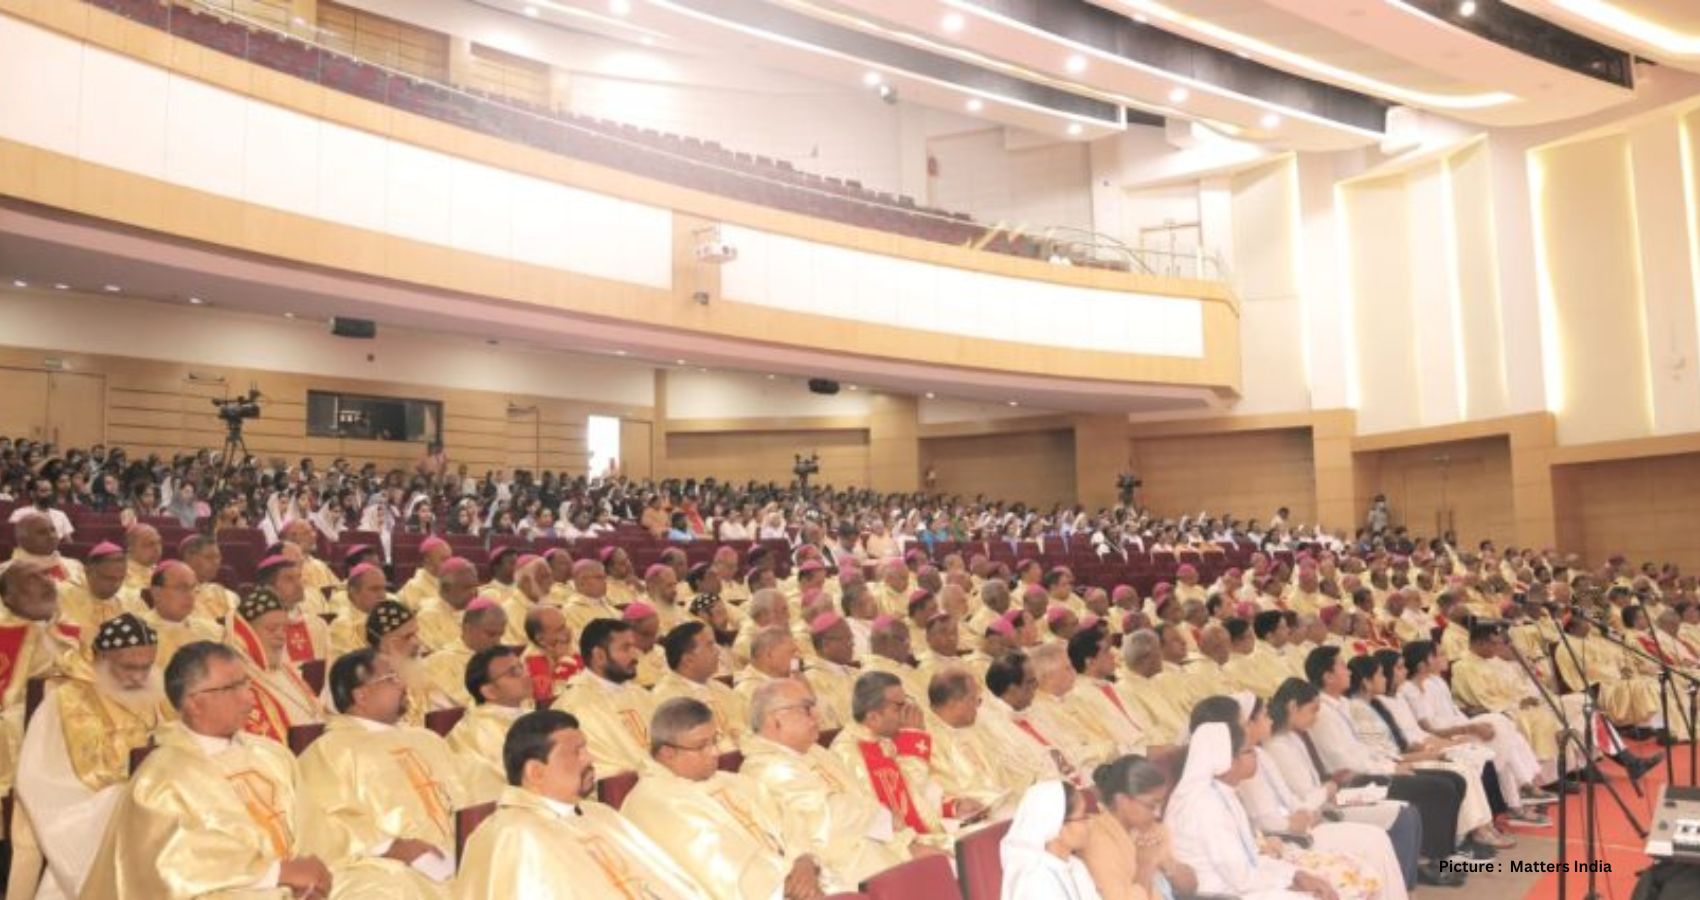 Featured & Cover Catholic Bishops in India Stand Firm Amidst Rising Attacks Affirm Commitment to Serving the Marginalized